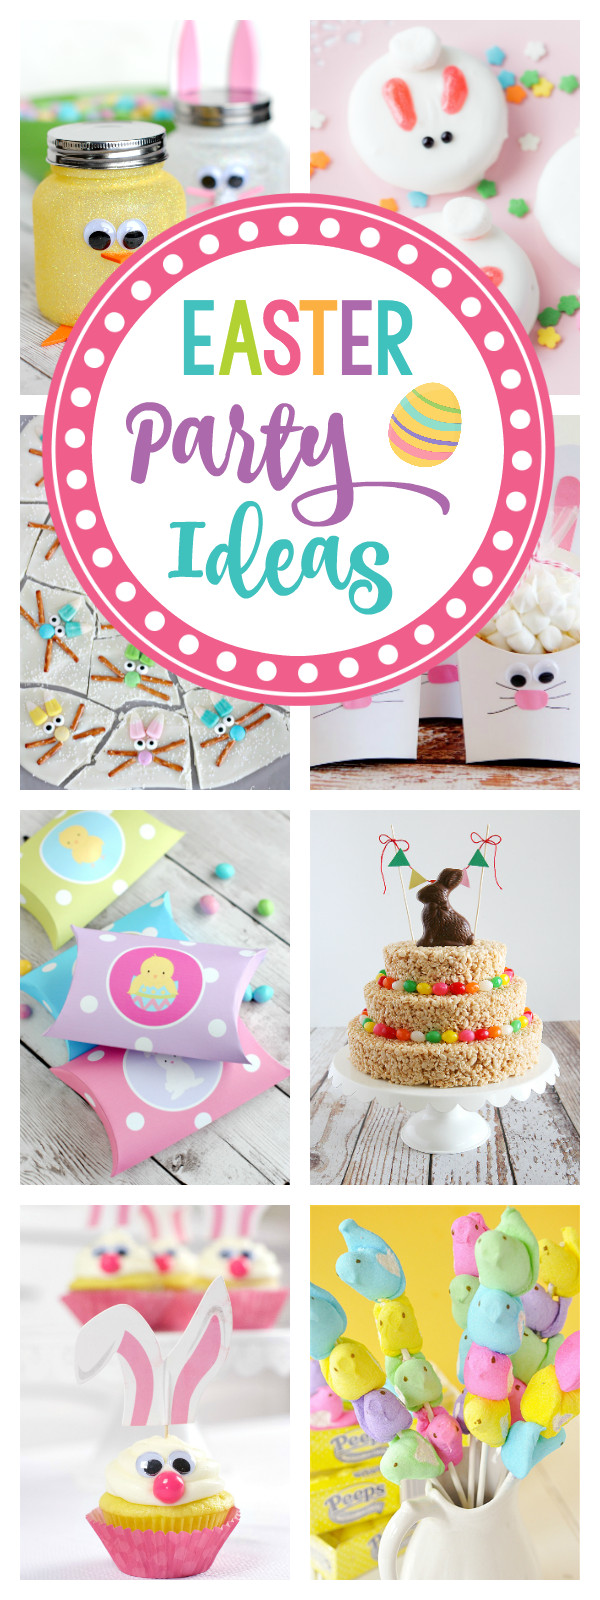 Easter Kids Party Ideas
 25 Fun Easter Party Ideas for Kids – Fun Squared